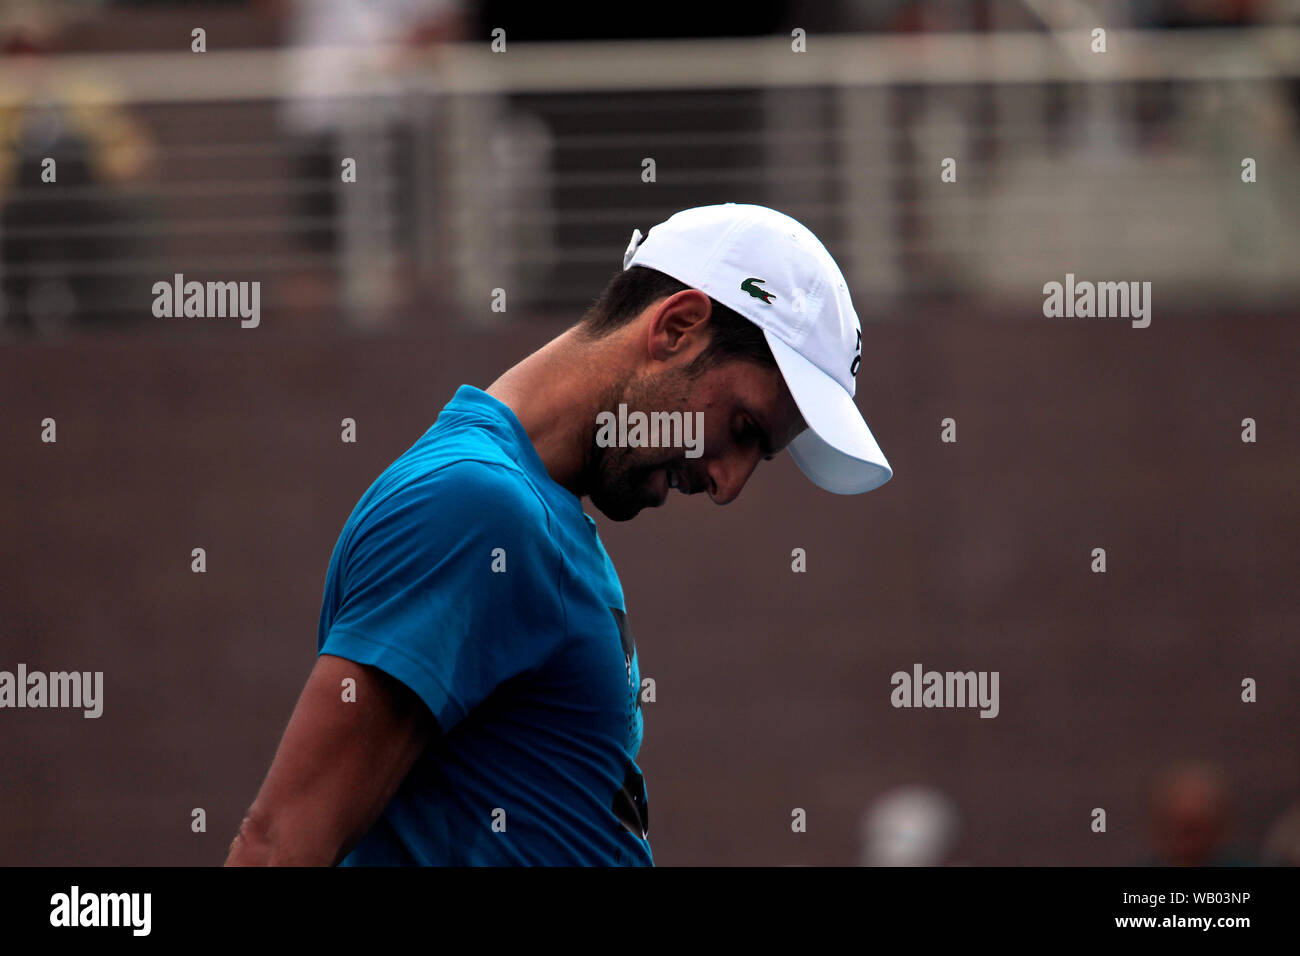 Flushing Meadows, New York, United States - 21 August 2019. Novak Djokovic while practicing at the National Tennis Center in Flushing Meadows, New York in preparation for the US Open which begins next Monday. Credit: Adam Stoltman/Alamy Live News Stock Photo